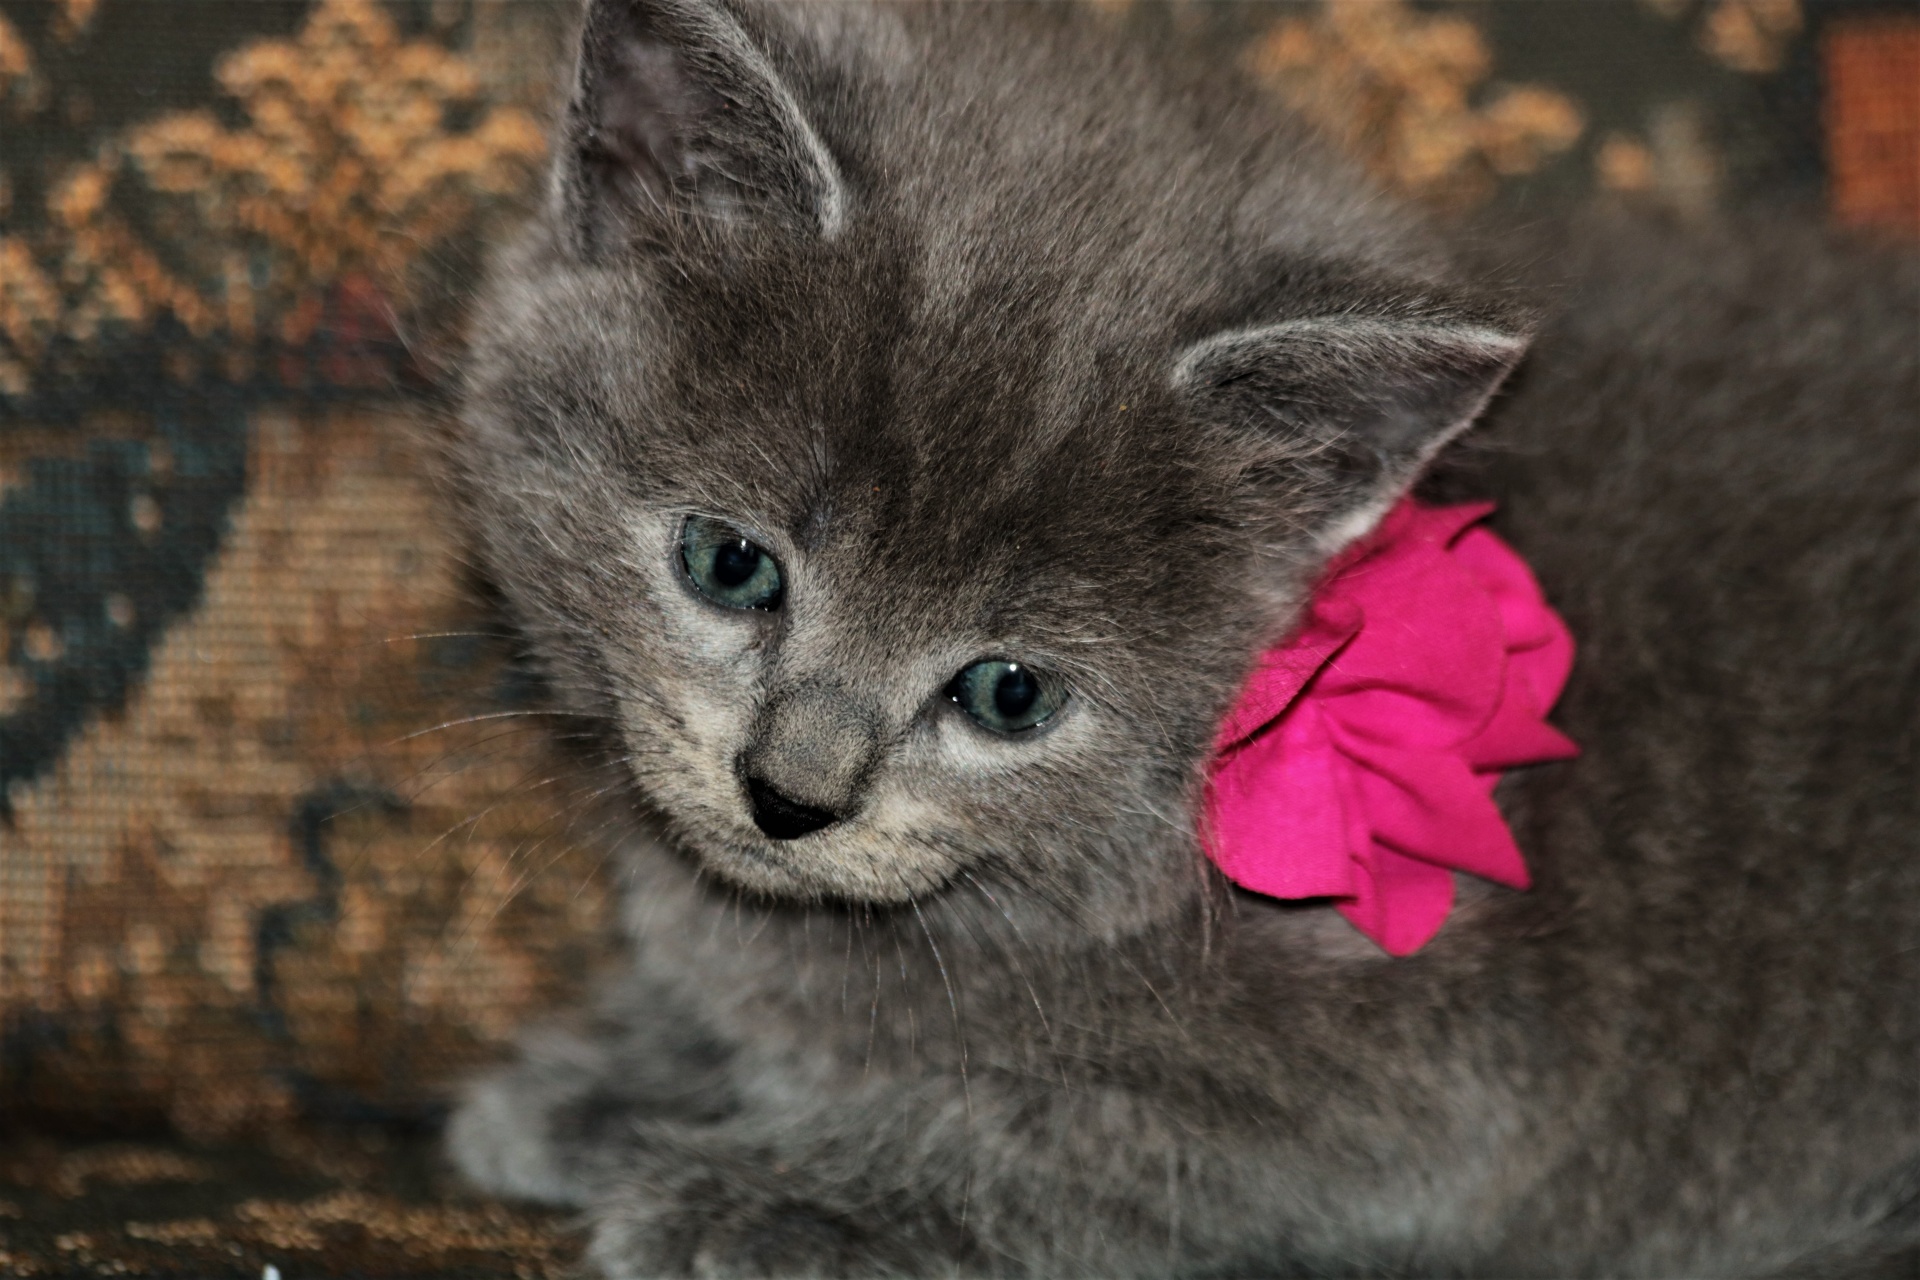 Close-up of a cute little gray kitten with blue eyes and a pink bow, looking downward.